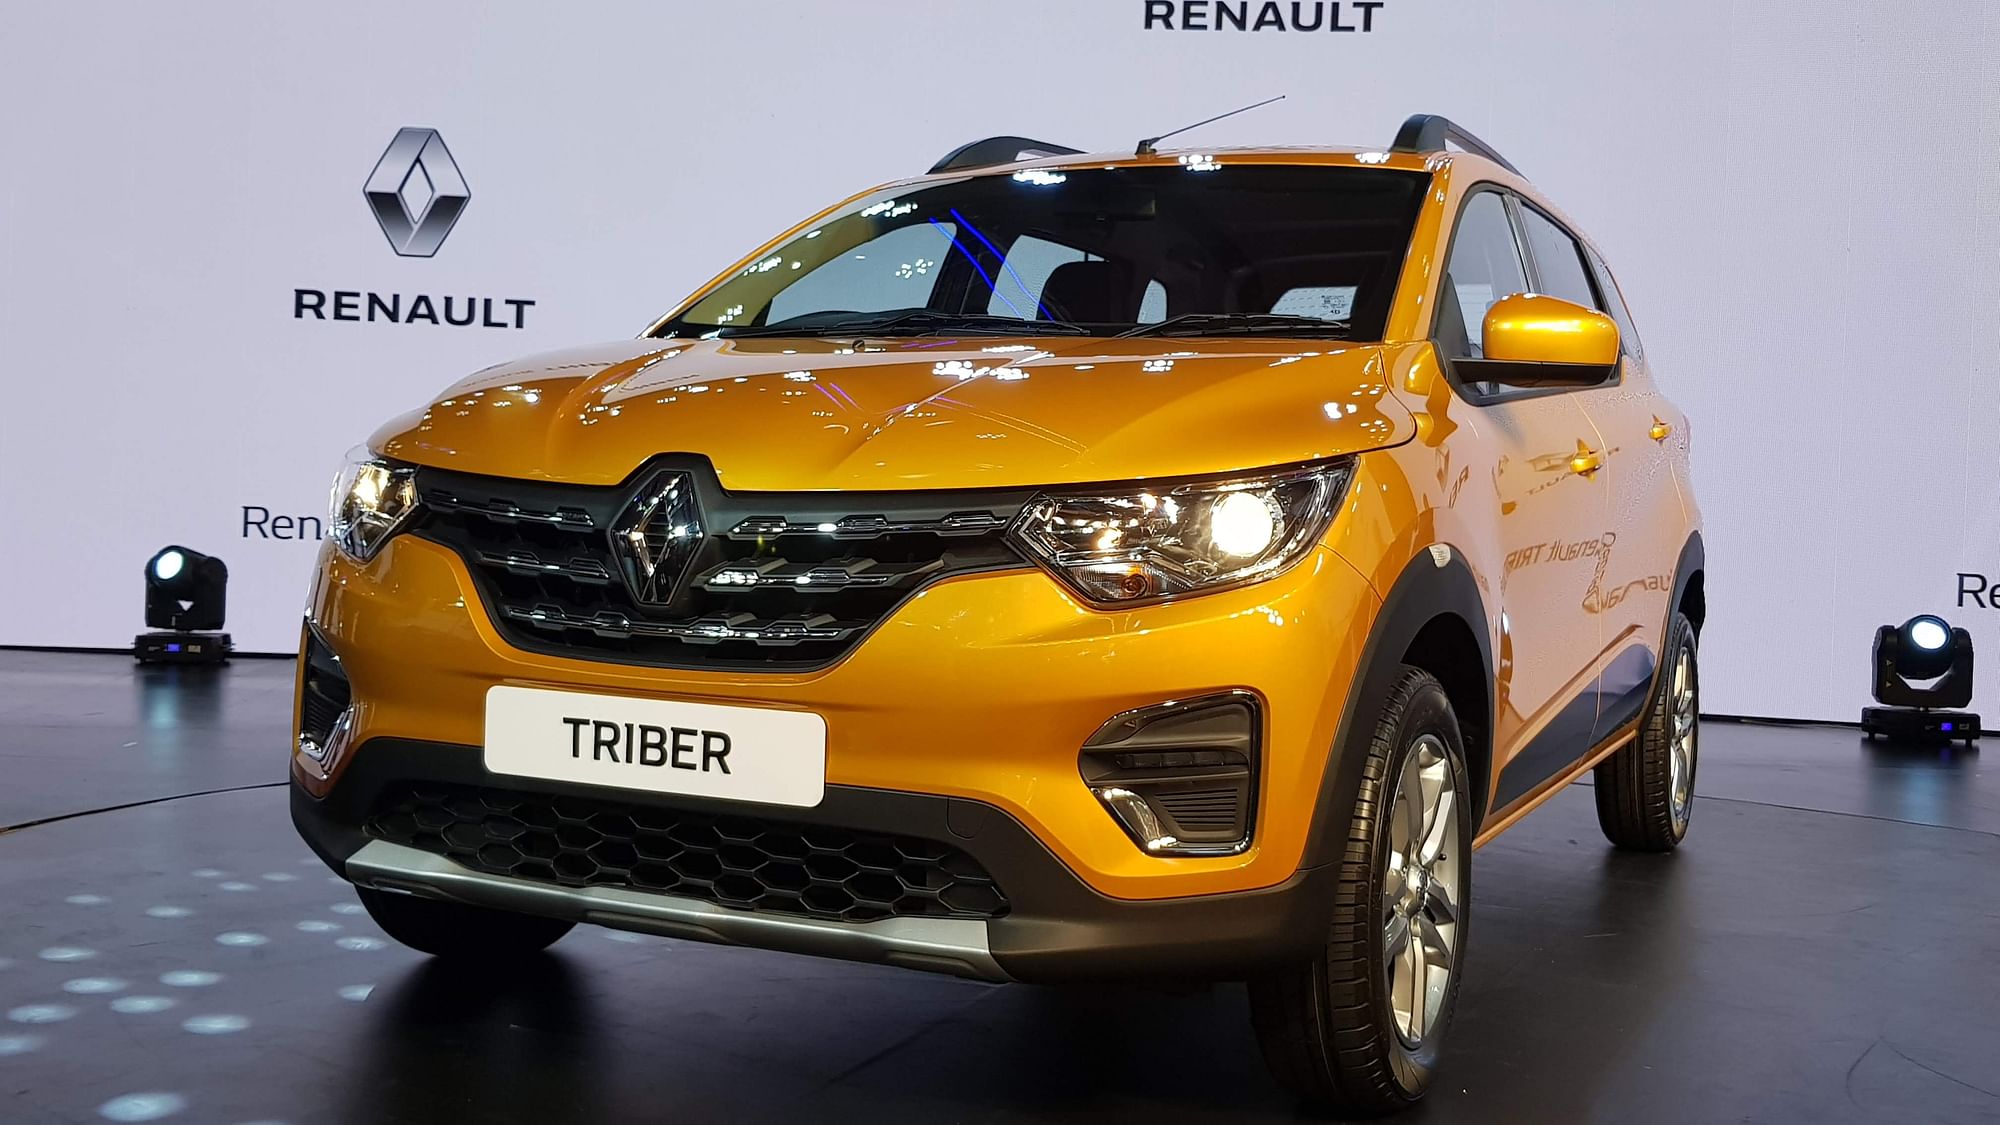 The Renault Triber comes in four variants, priced between Rs 4.95 lakh and Rs 6.49 lakh ex-showroom.&nbsp;